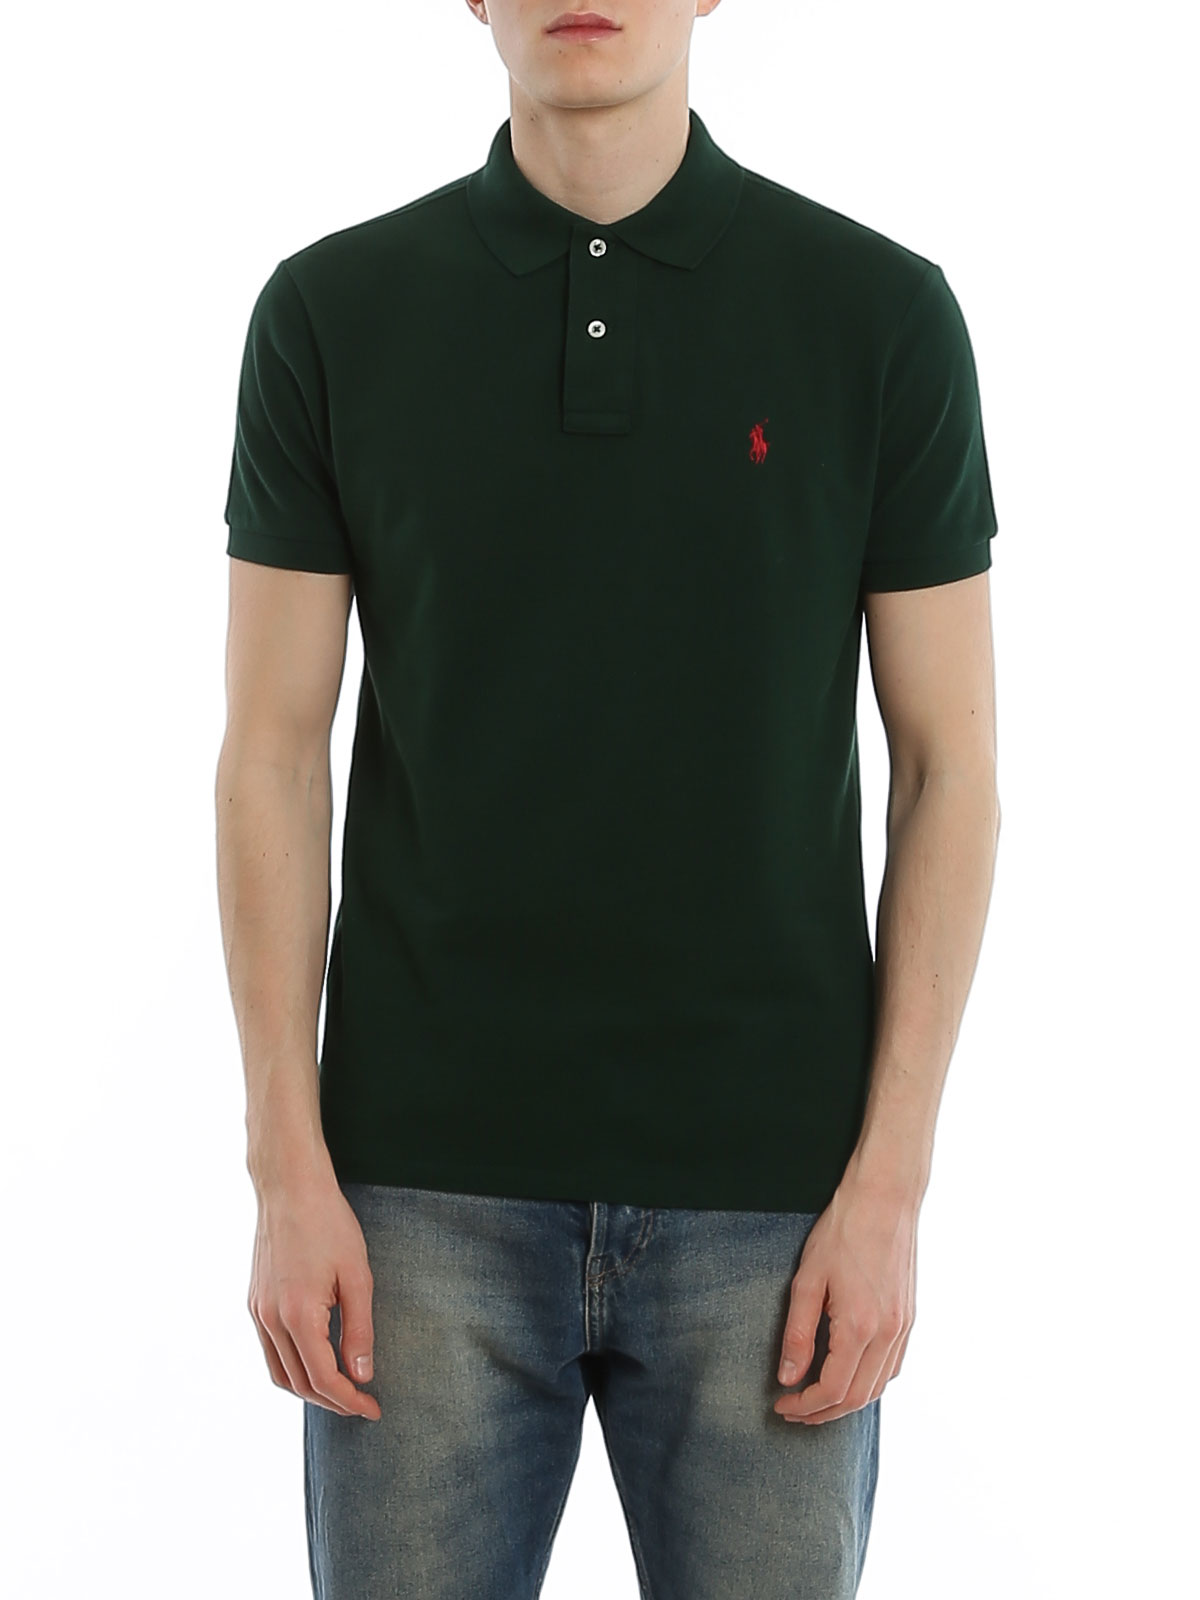 Picture of POLO RALPH LAUREN | Men's Slim Fit Polo Shirt